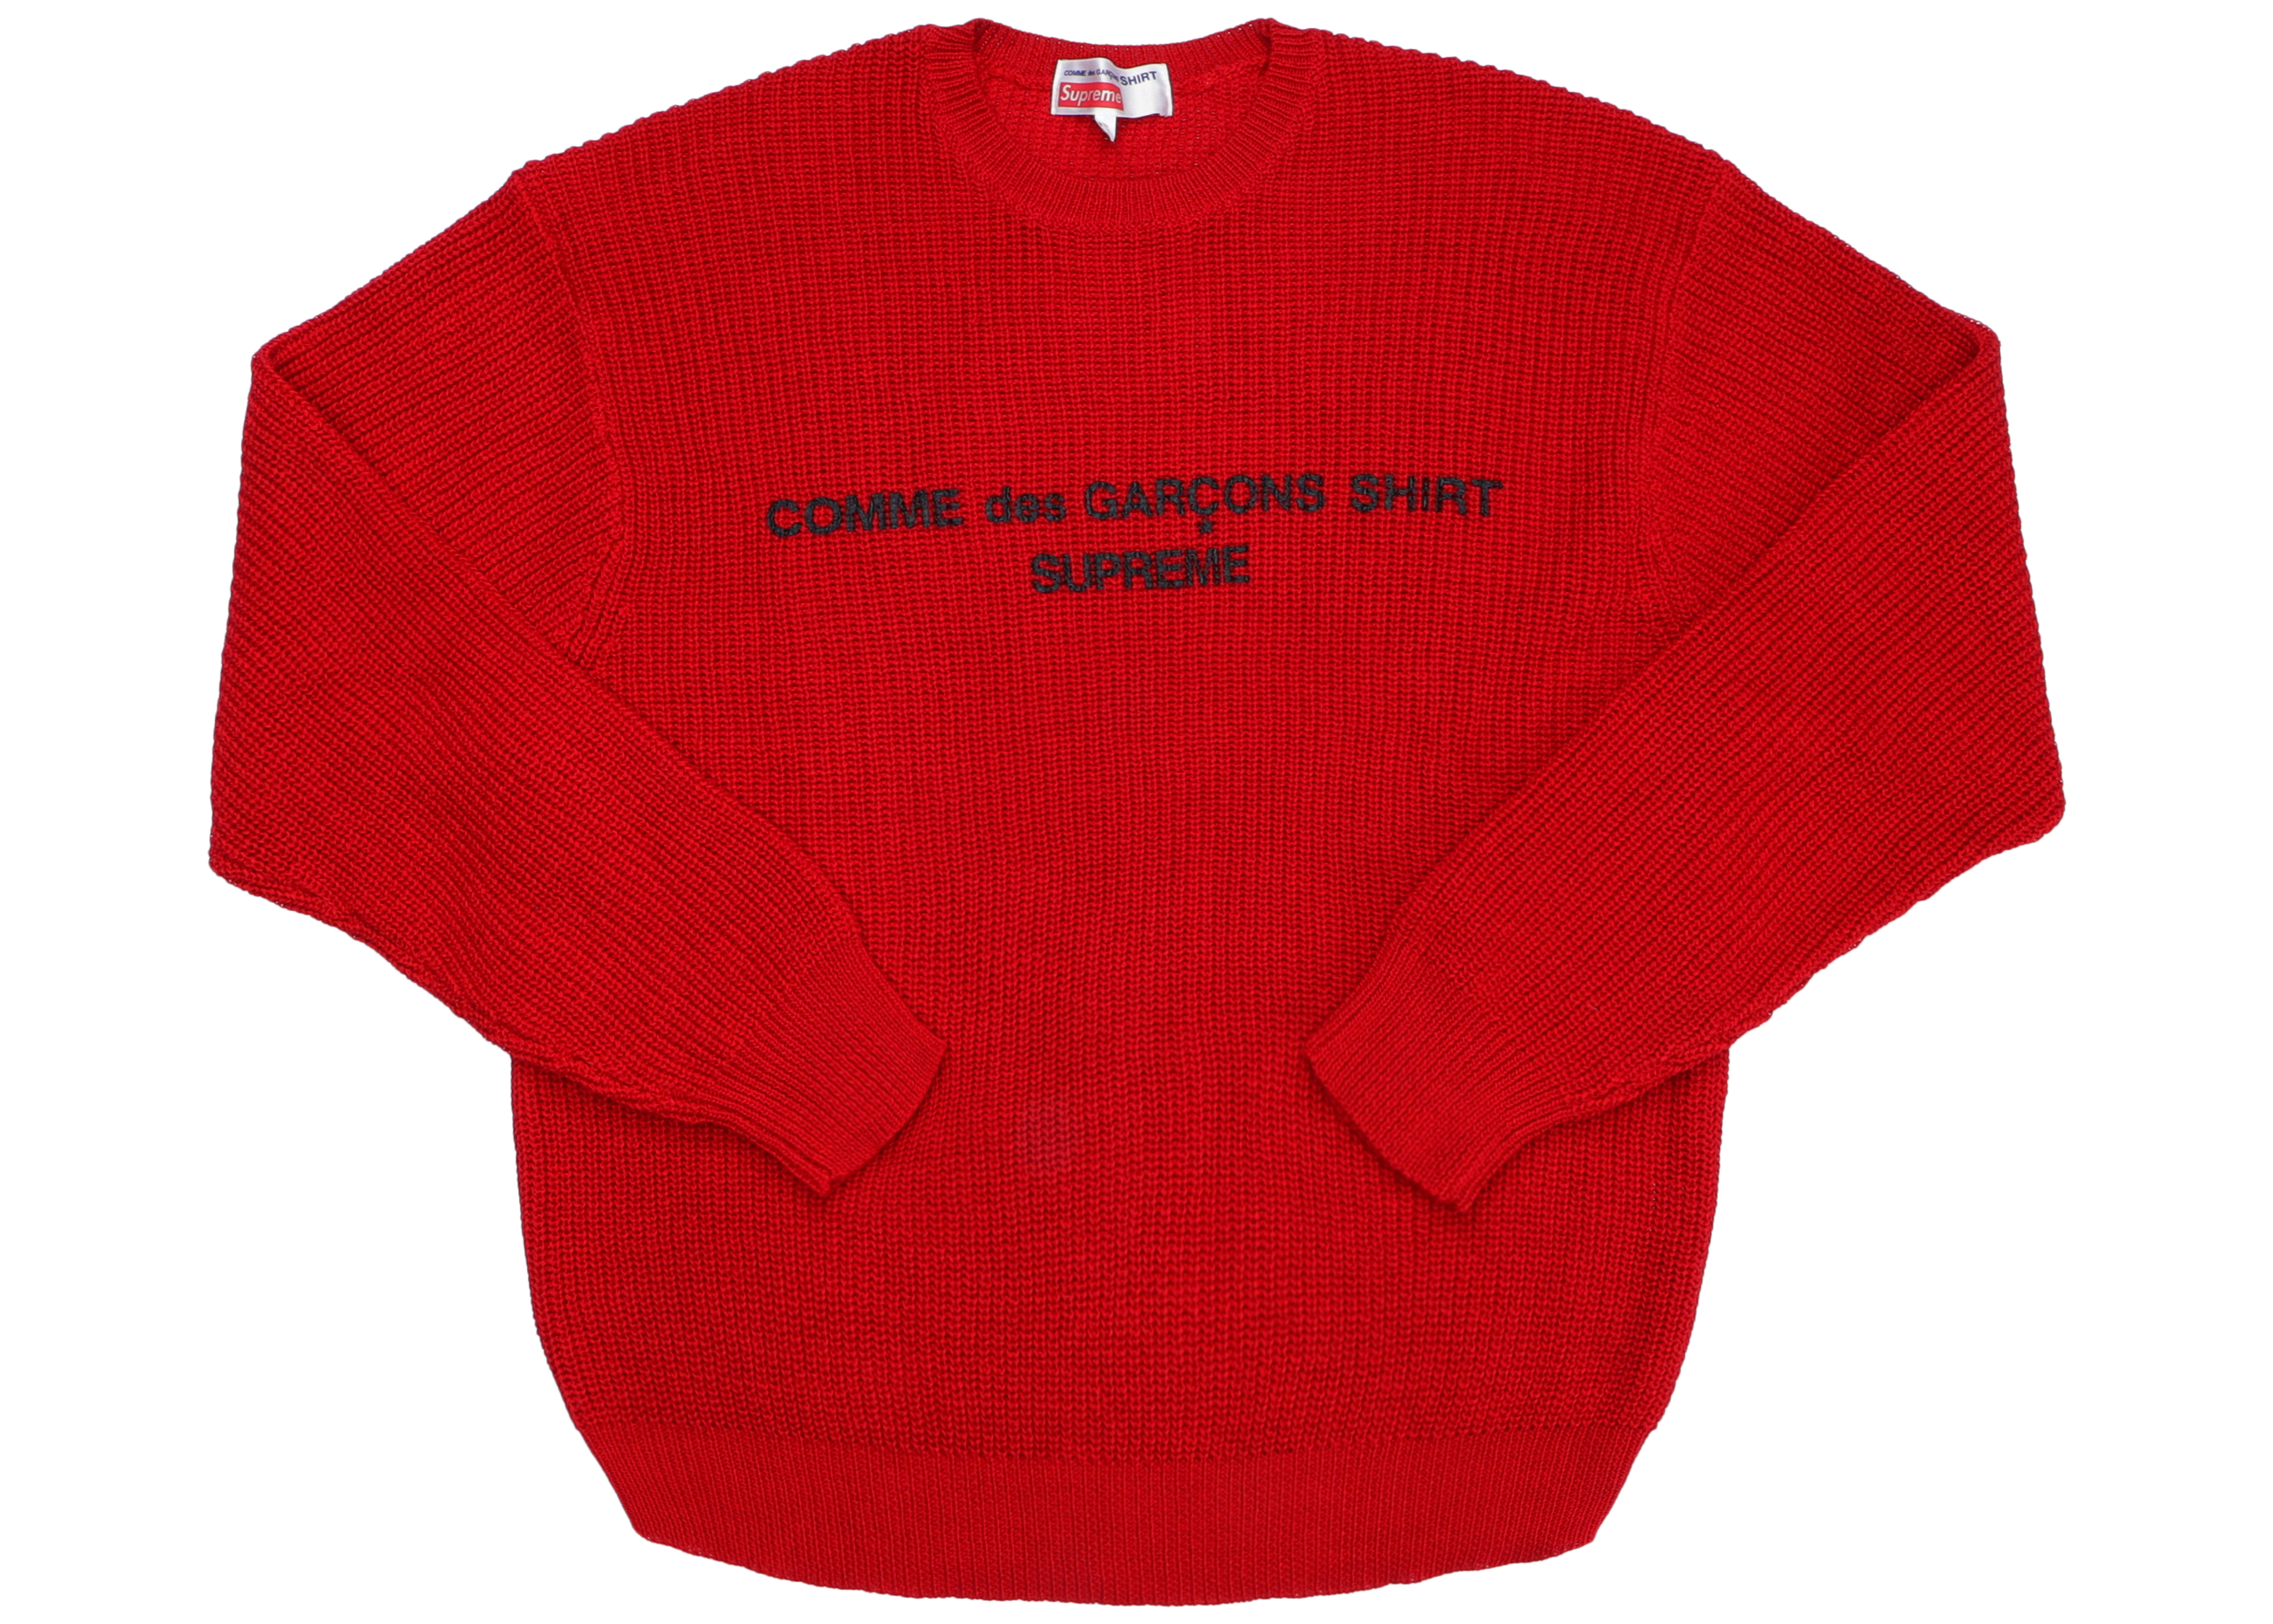 Supreme Comme des Garcons SHIRT Sweater Red メンズ - FW18 - JP